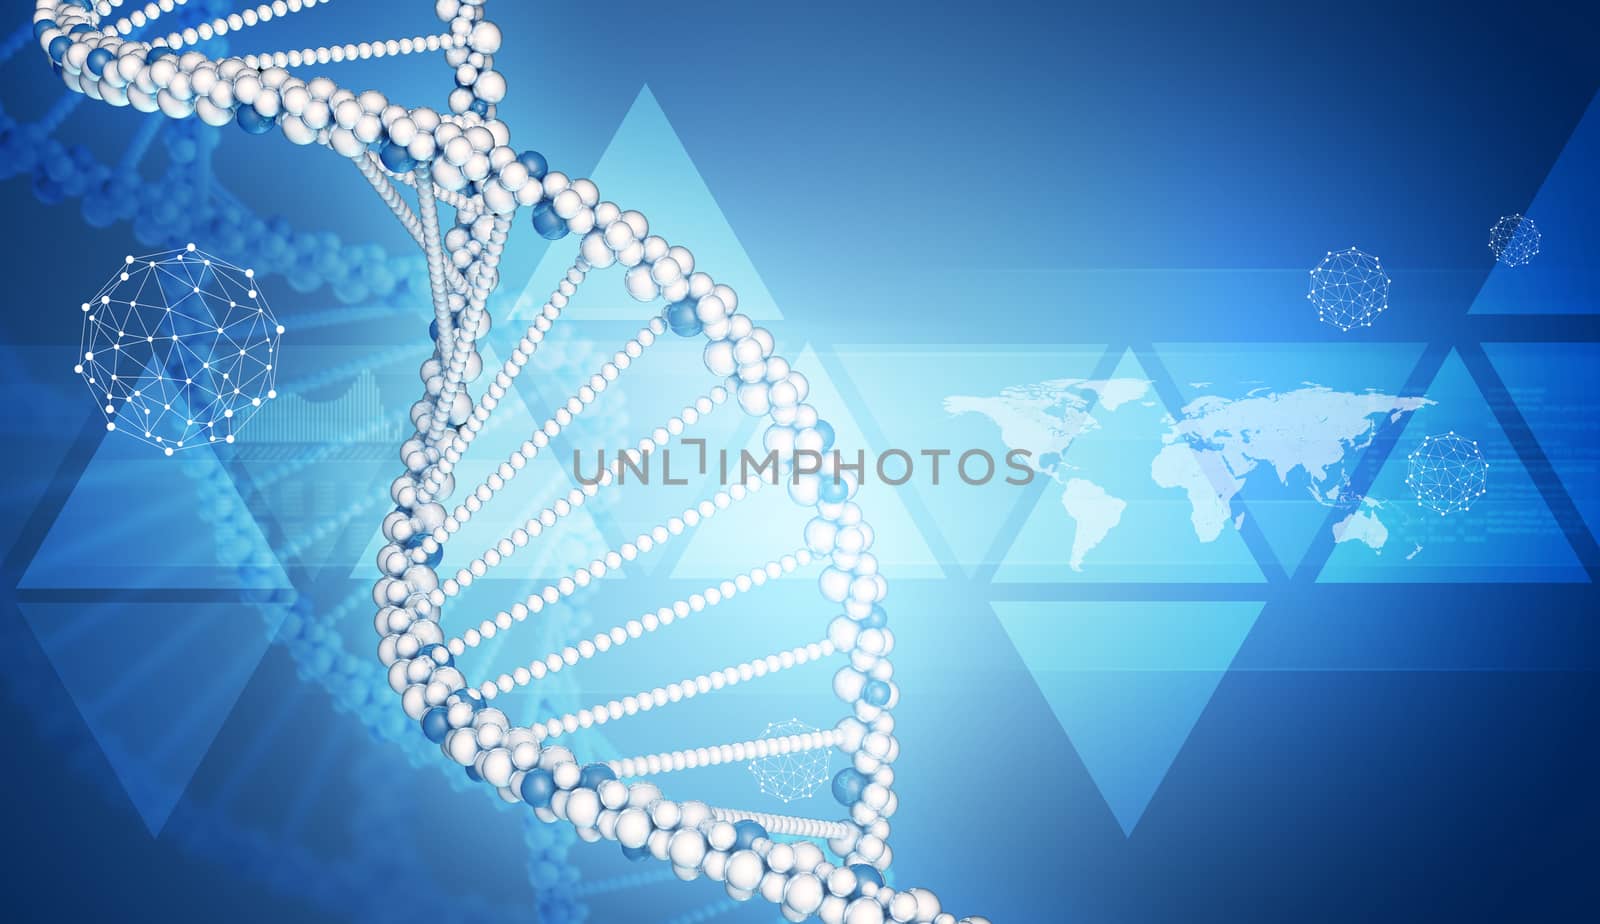 DNA model with triangles, wire-frame sphere and world map. Blue gradient background